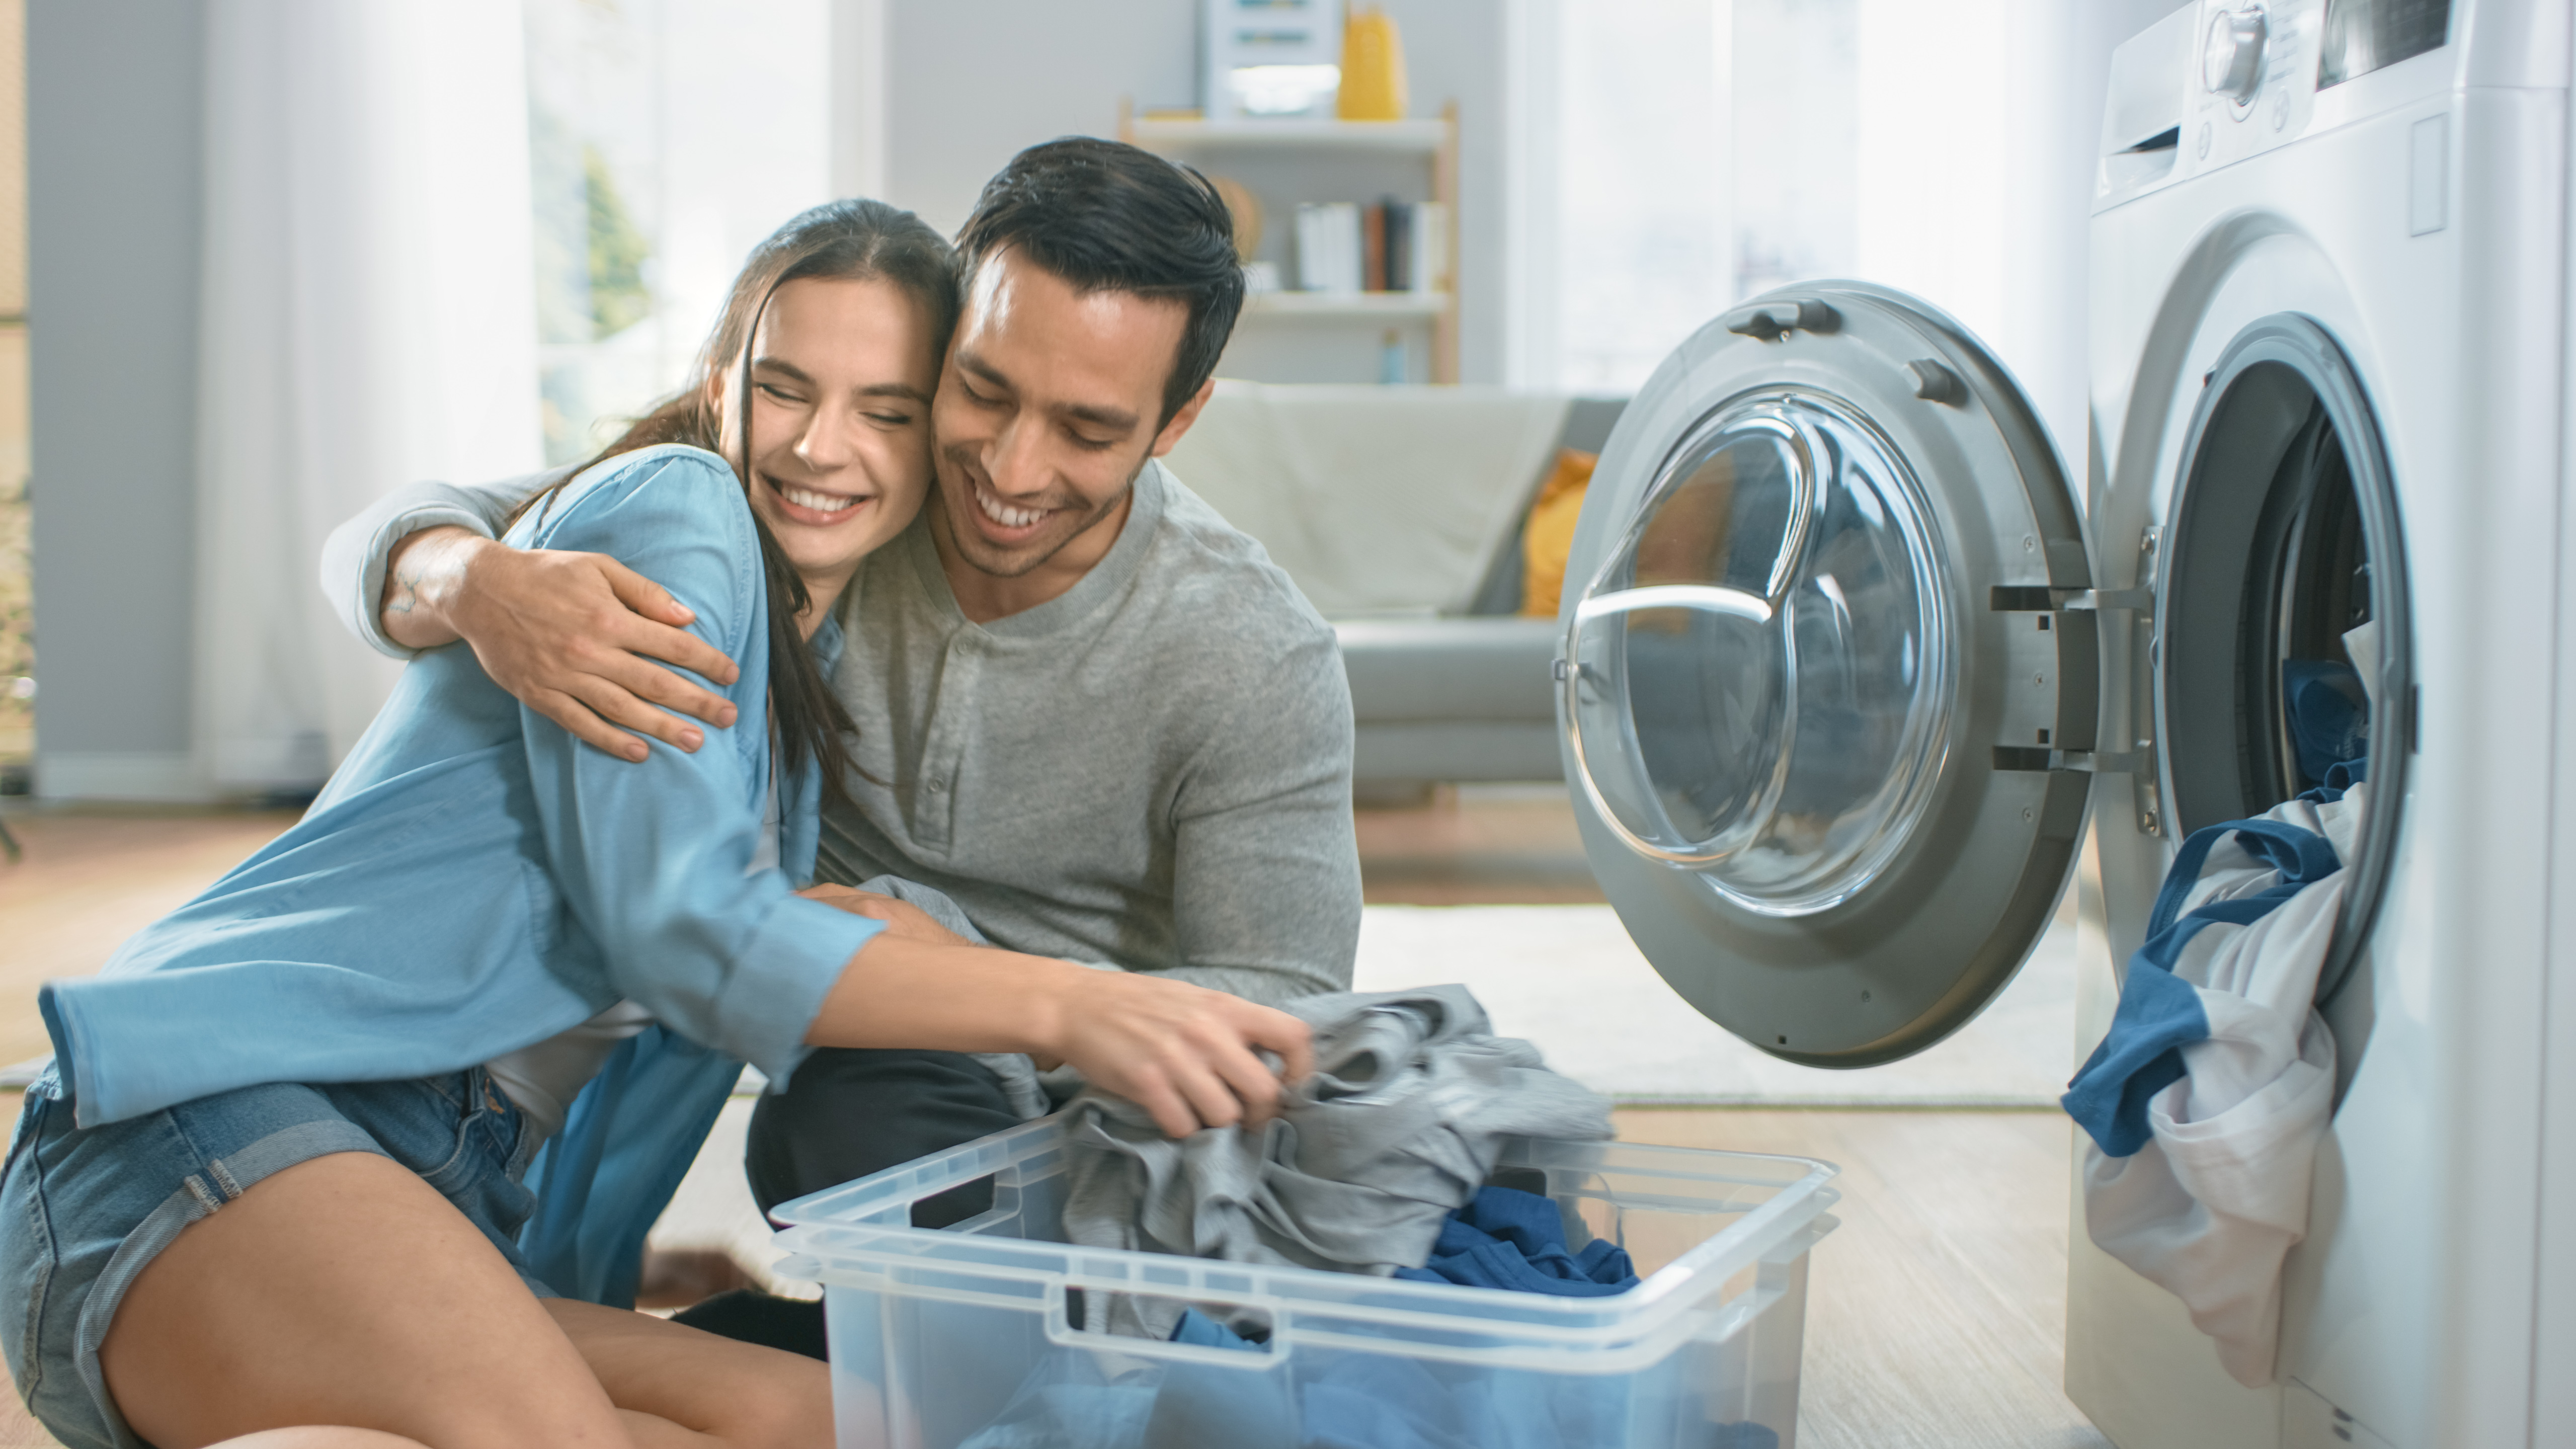 Man and woman hugging while doing laundry